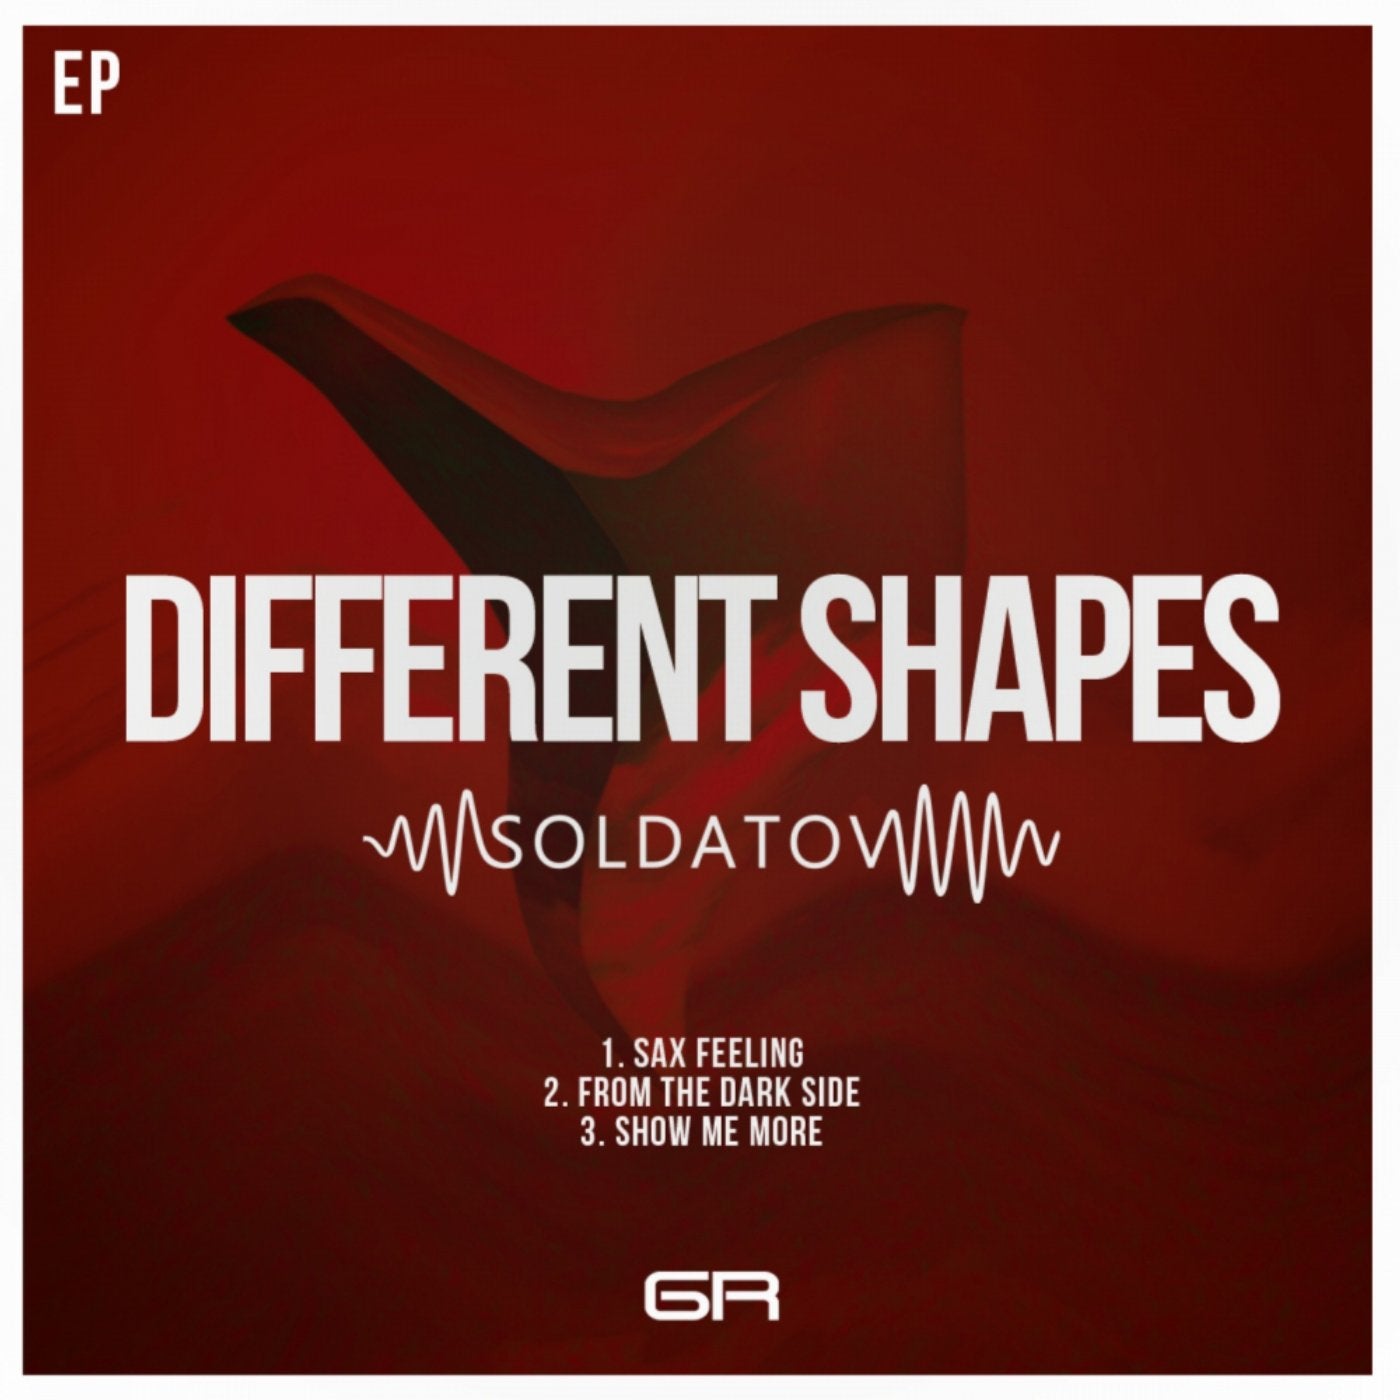 Different Shapes EP